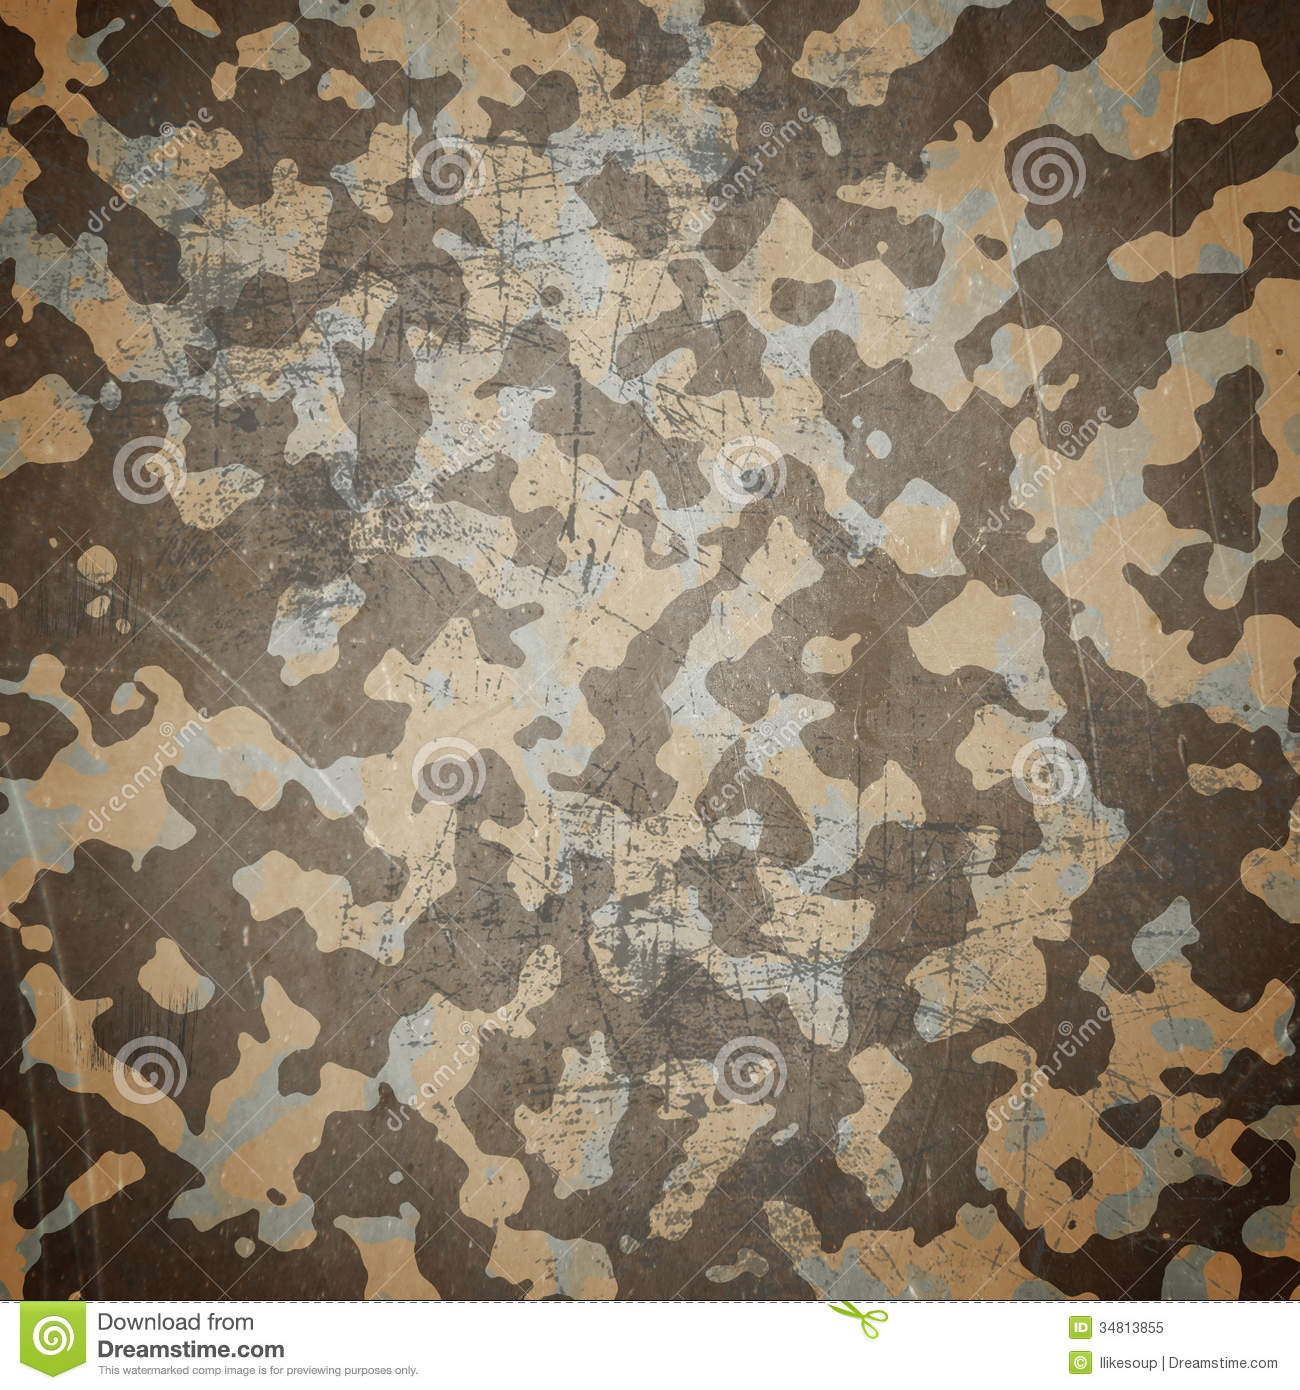 Army Camouflage Background Clipart   Clipart Suggest